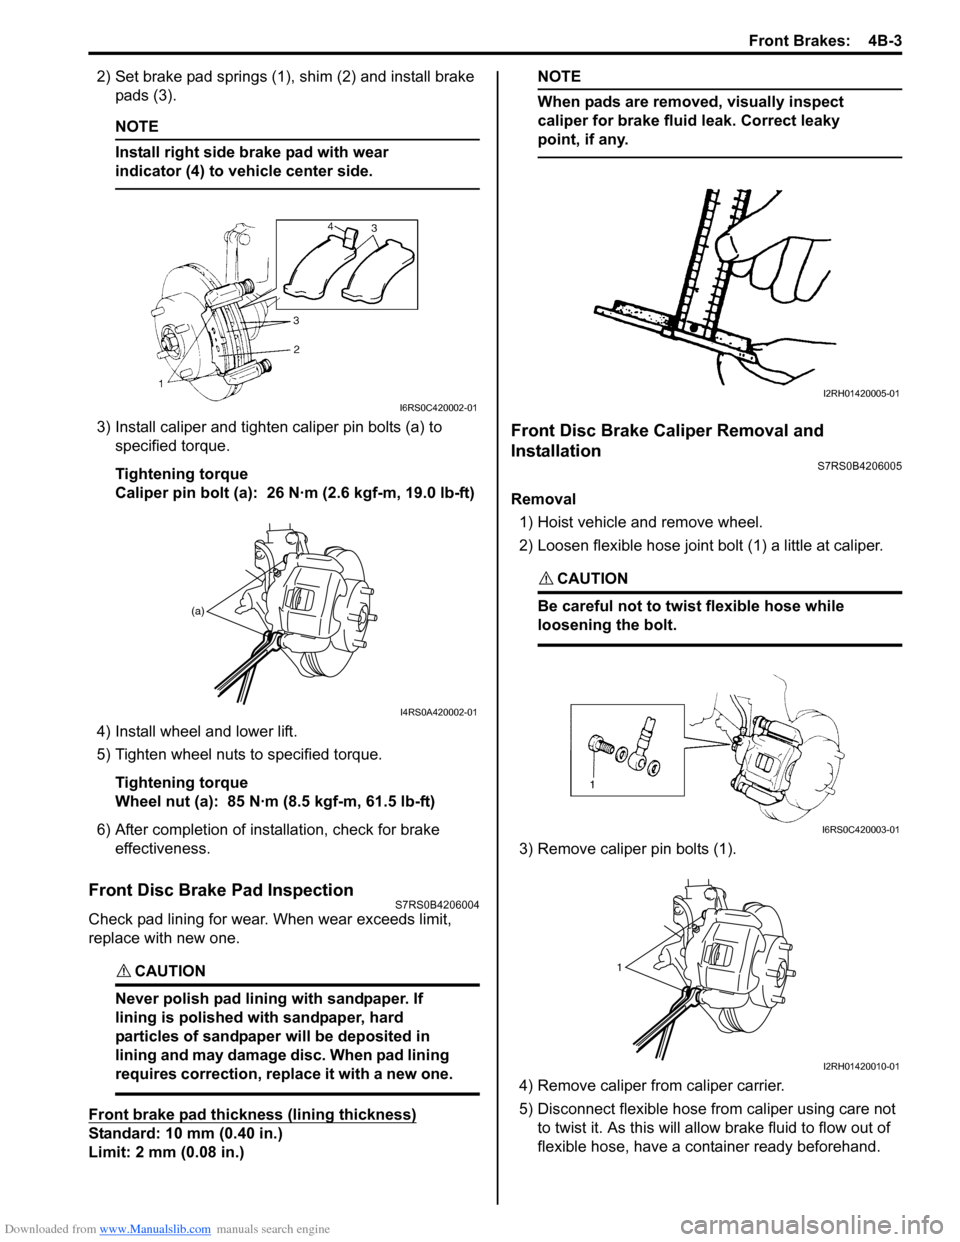 SUZUKI SWIFT 2007 2.G Service Workshop Manual Downloaded from www.Manualslib.com manuals search engine Front Brakes:  4B-3
2) Set brake pad springs (1), shim (2) and install brake pads (3).
NOTE
Install right side brake pad with wear 
indicator (